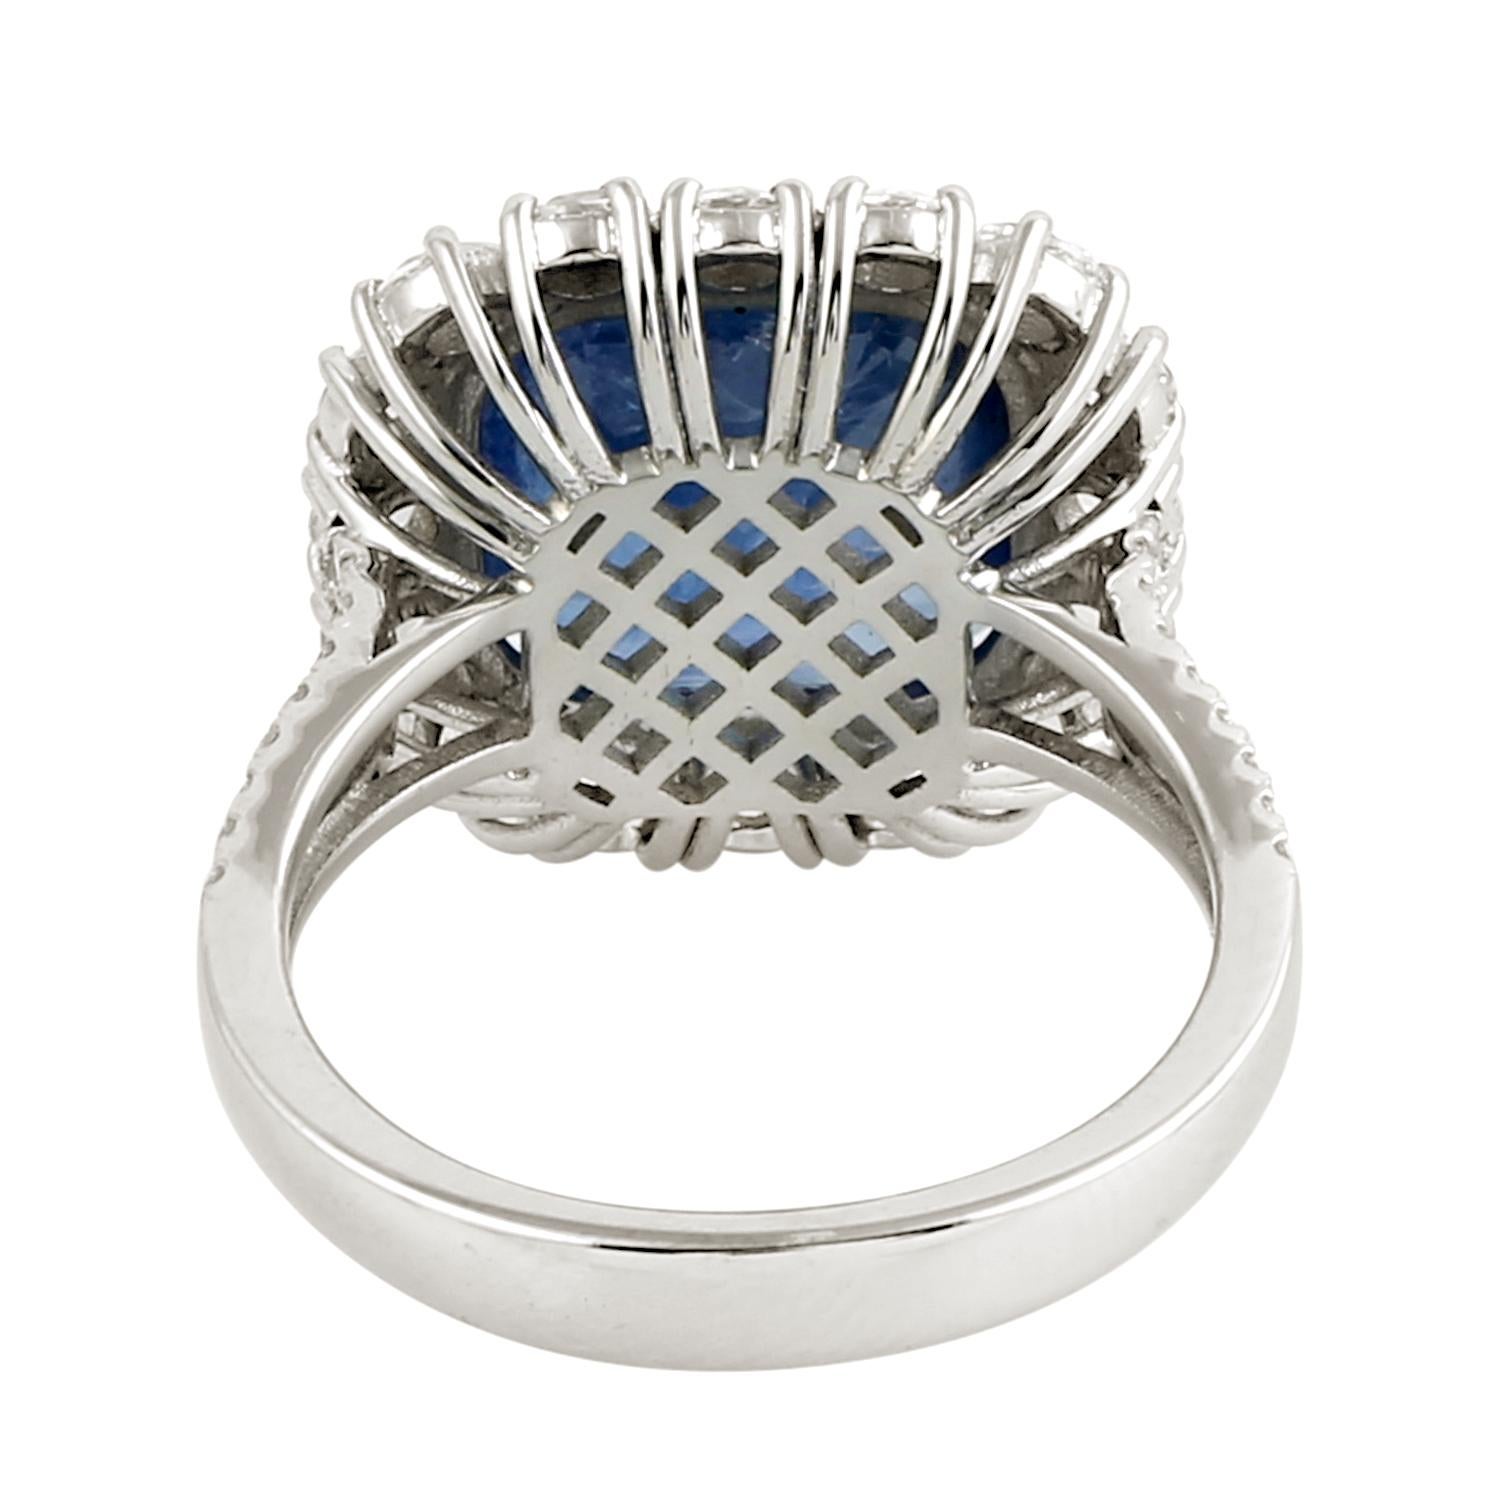 Mixed Cut Cushion Shaped Blue Sapphire Cocktail Ring With Diamonds For Sale